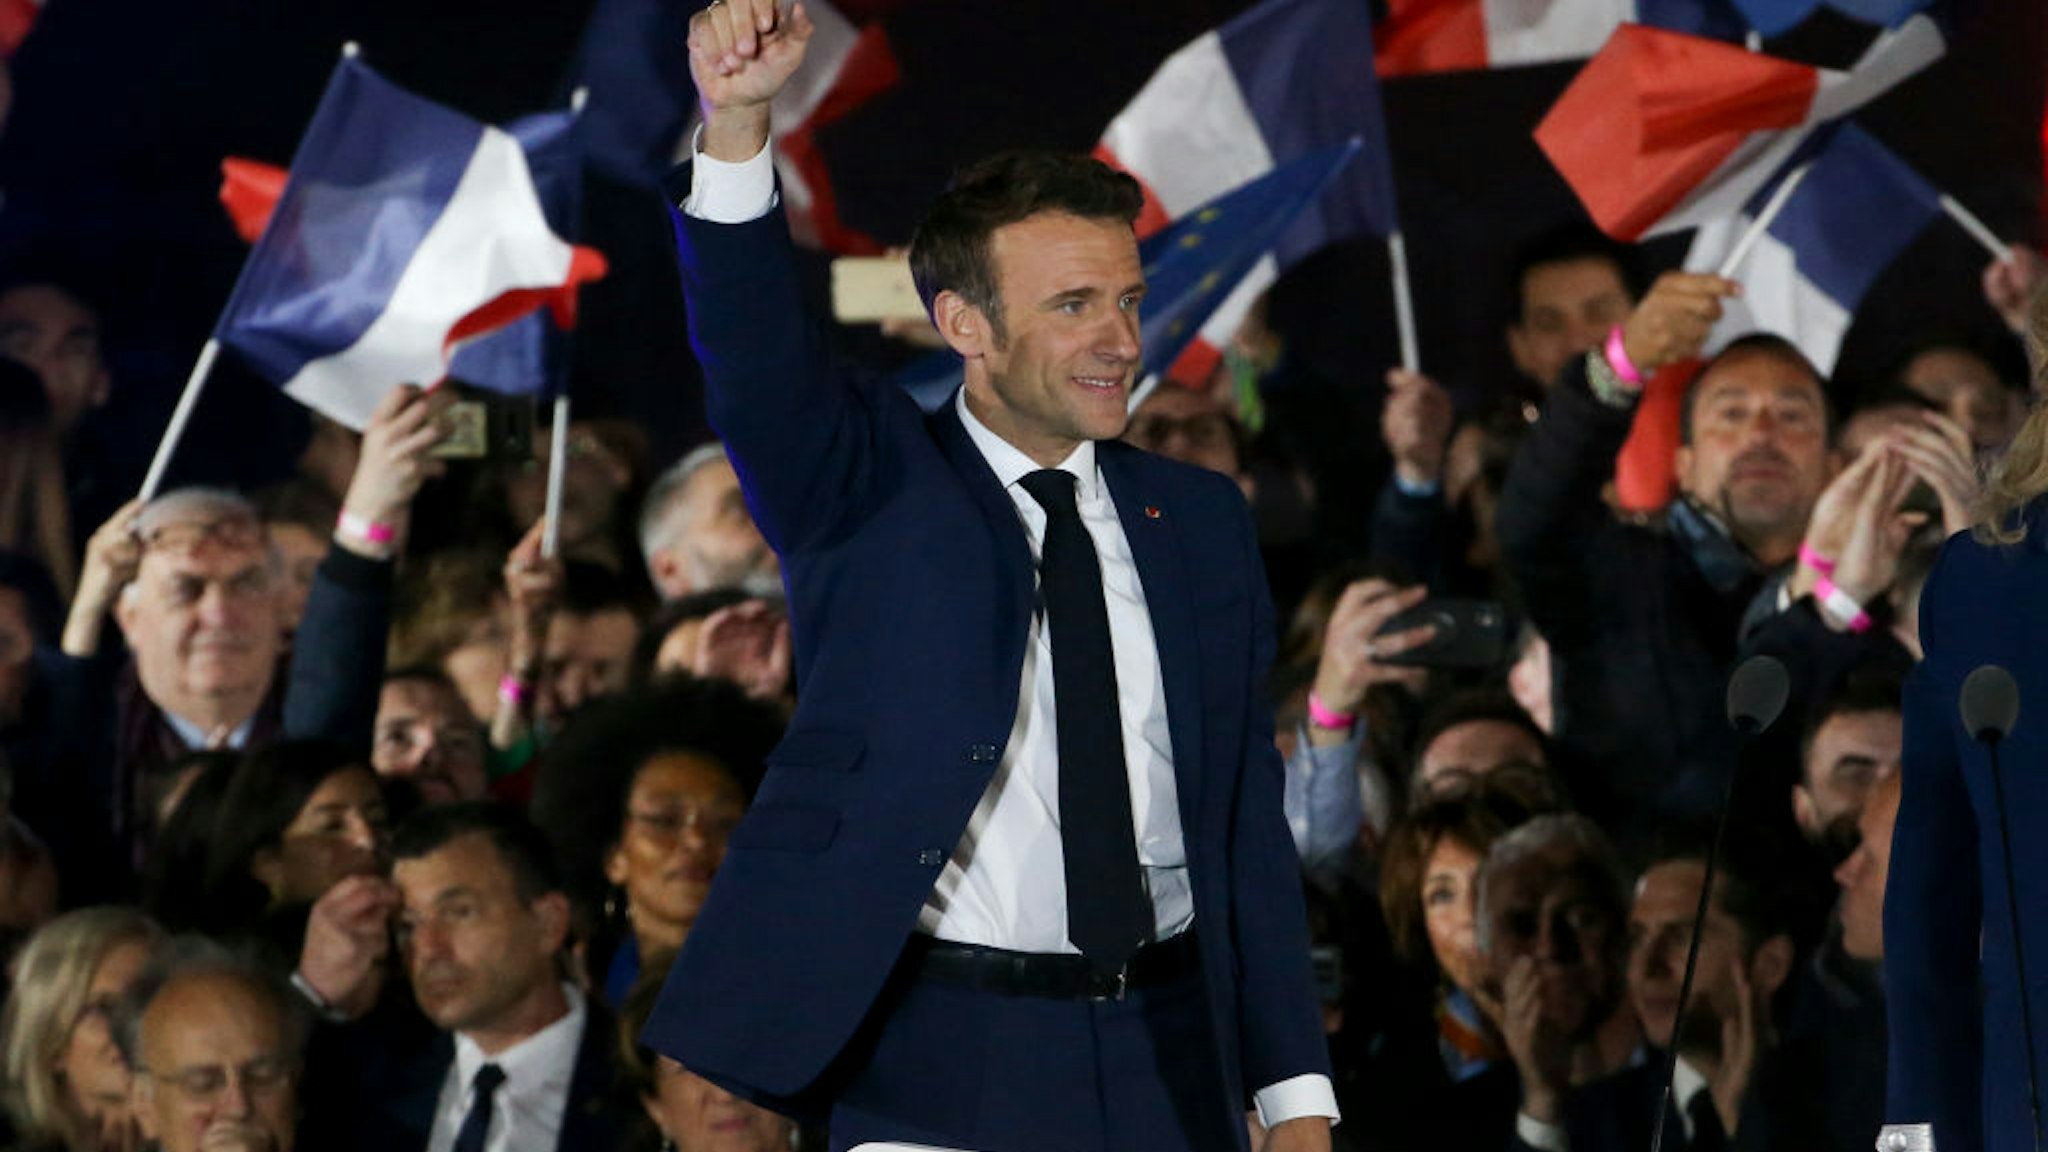 PARIS, FRANCE - APRIL 24: French President Emmanuel Macron celebrates his re-election at the Champ de Mars near the Eiffel Tower on April 24, 2022 in Paris, France. France's centrist incumbent President Emmanuel Macron beats his far-right rival Marine Le Pen in the presidential second round for a second five-year term as President. (Photo by Jean Catuffe/Getty Images)